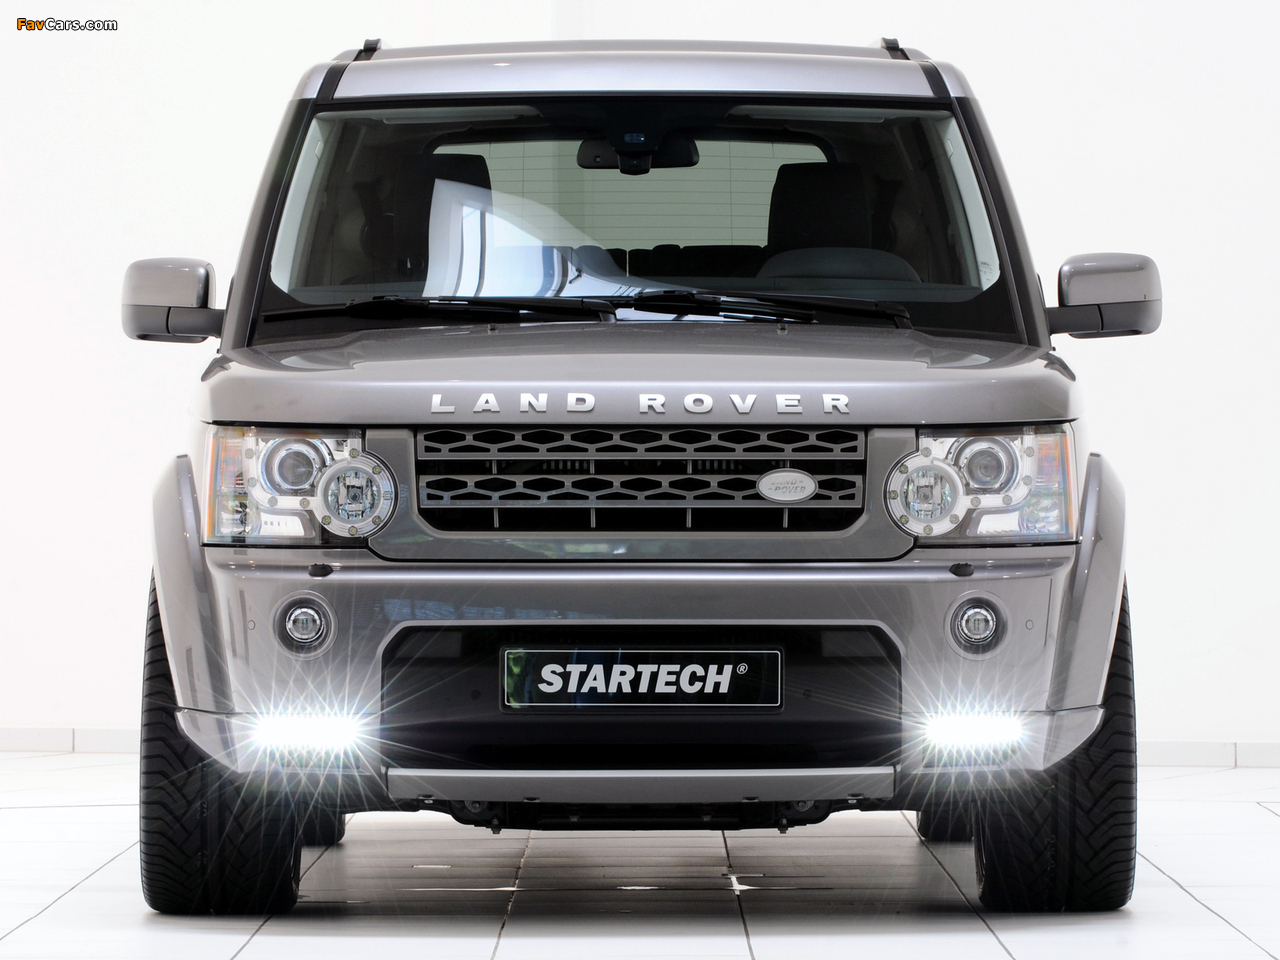 Startech Land Rover Discovery 4 2011 pictures (1280 x 960)